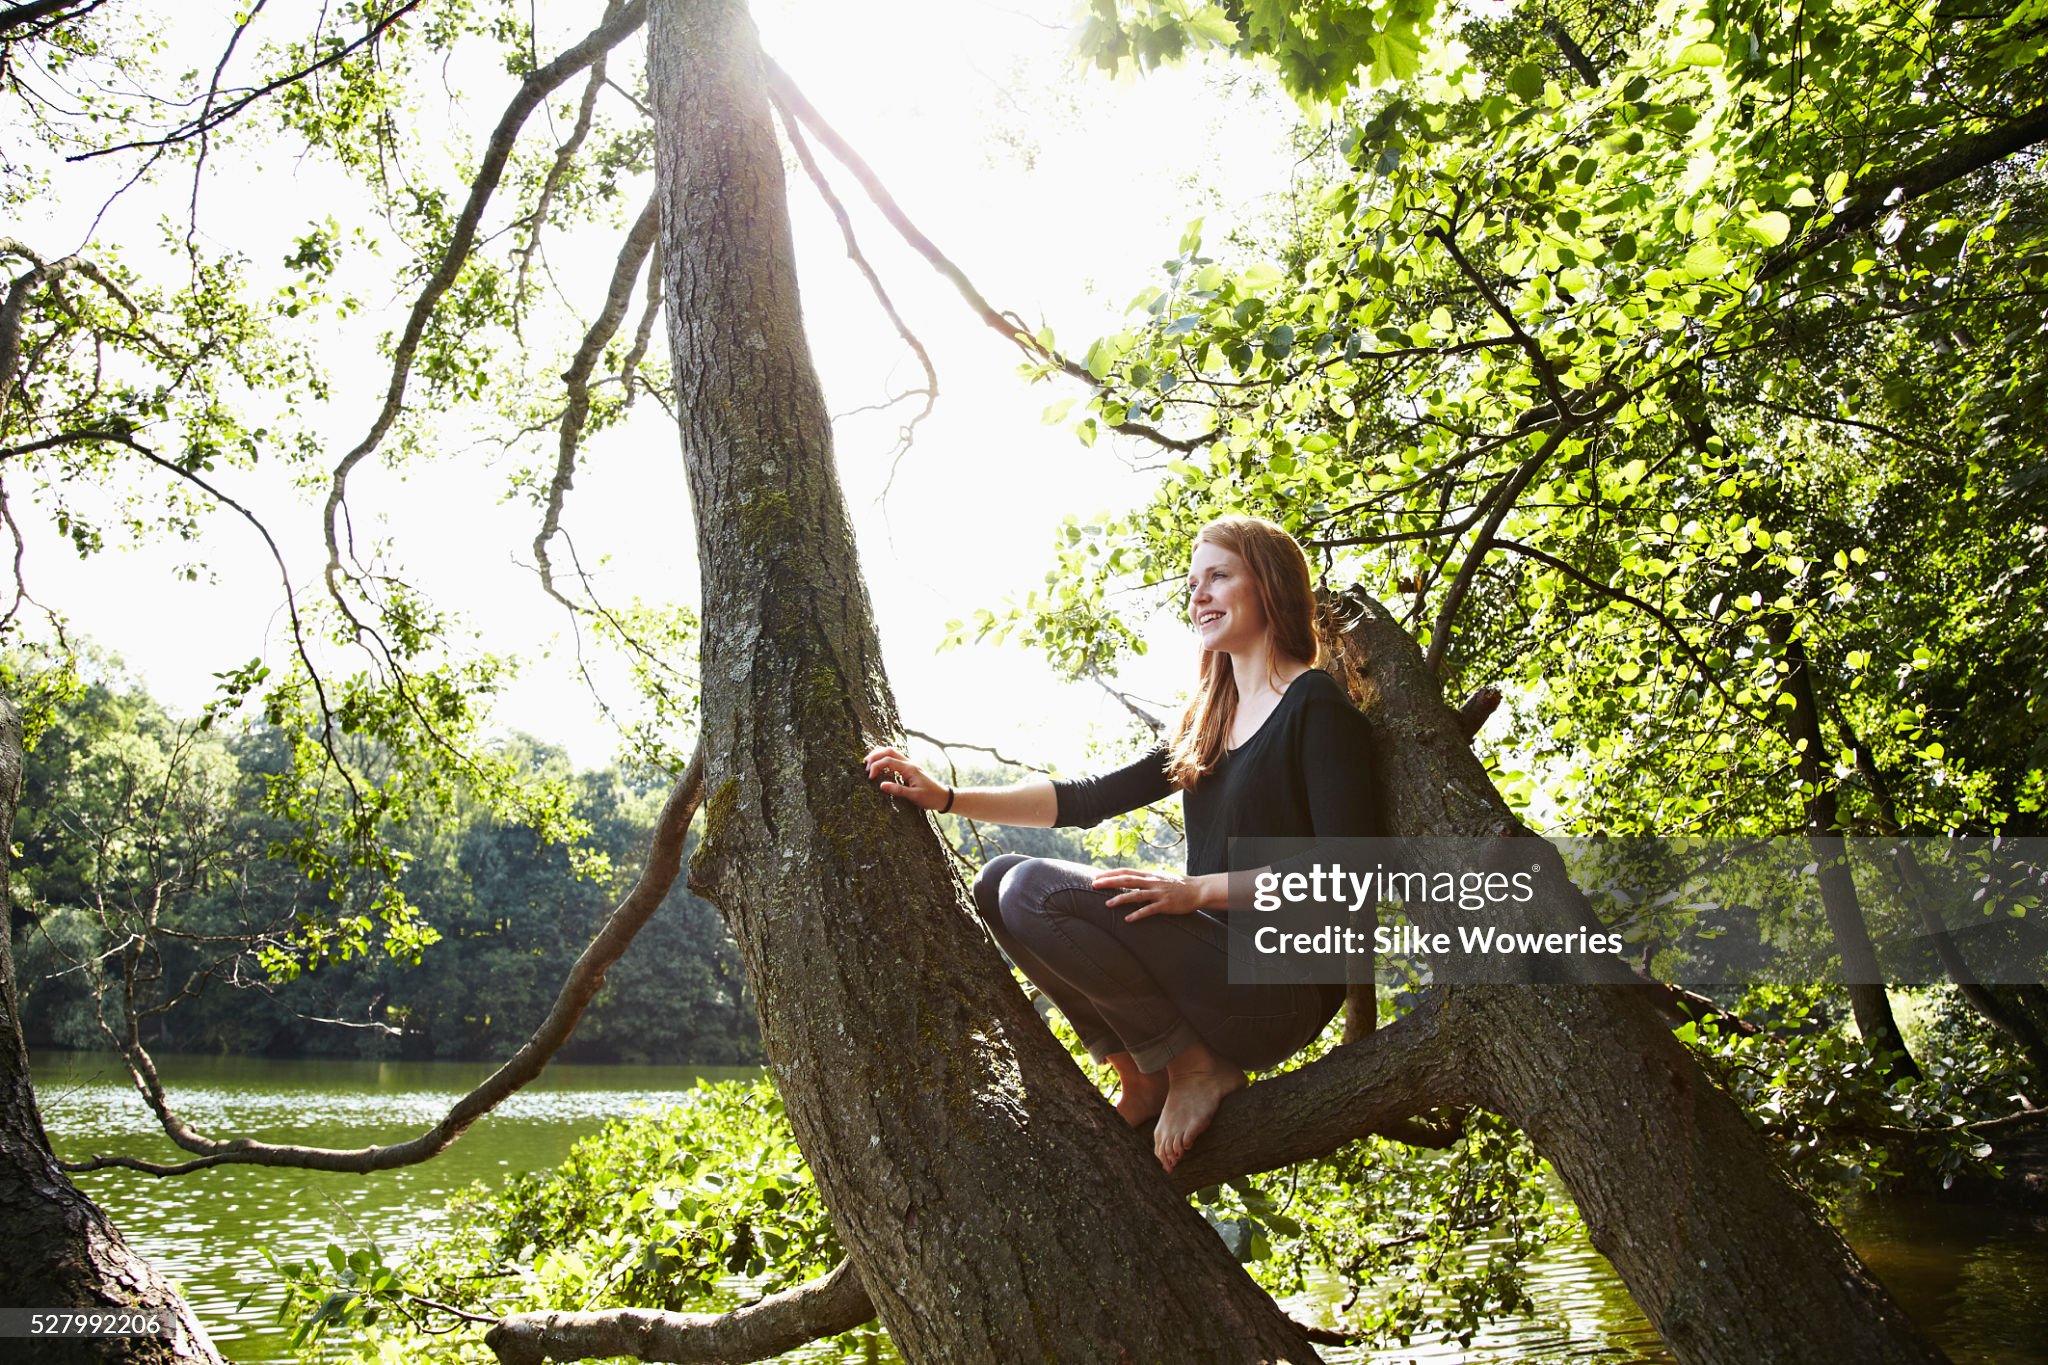 https://media.gettyimages.com/id/527992206/photo/young-woman-sitting-relaxed-on-branch.jpg?s=2048x2048&amp;w=gi&amp;k=20&amp;c=N5rBVjOPEAqEIbSk_oSnMxPu75RZJhUu00YchF8xIP8=